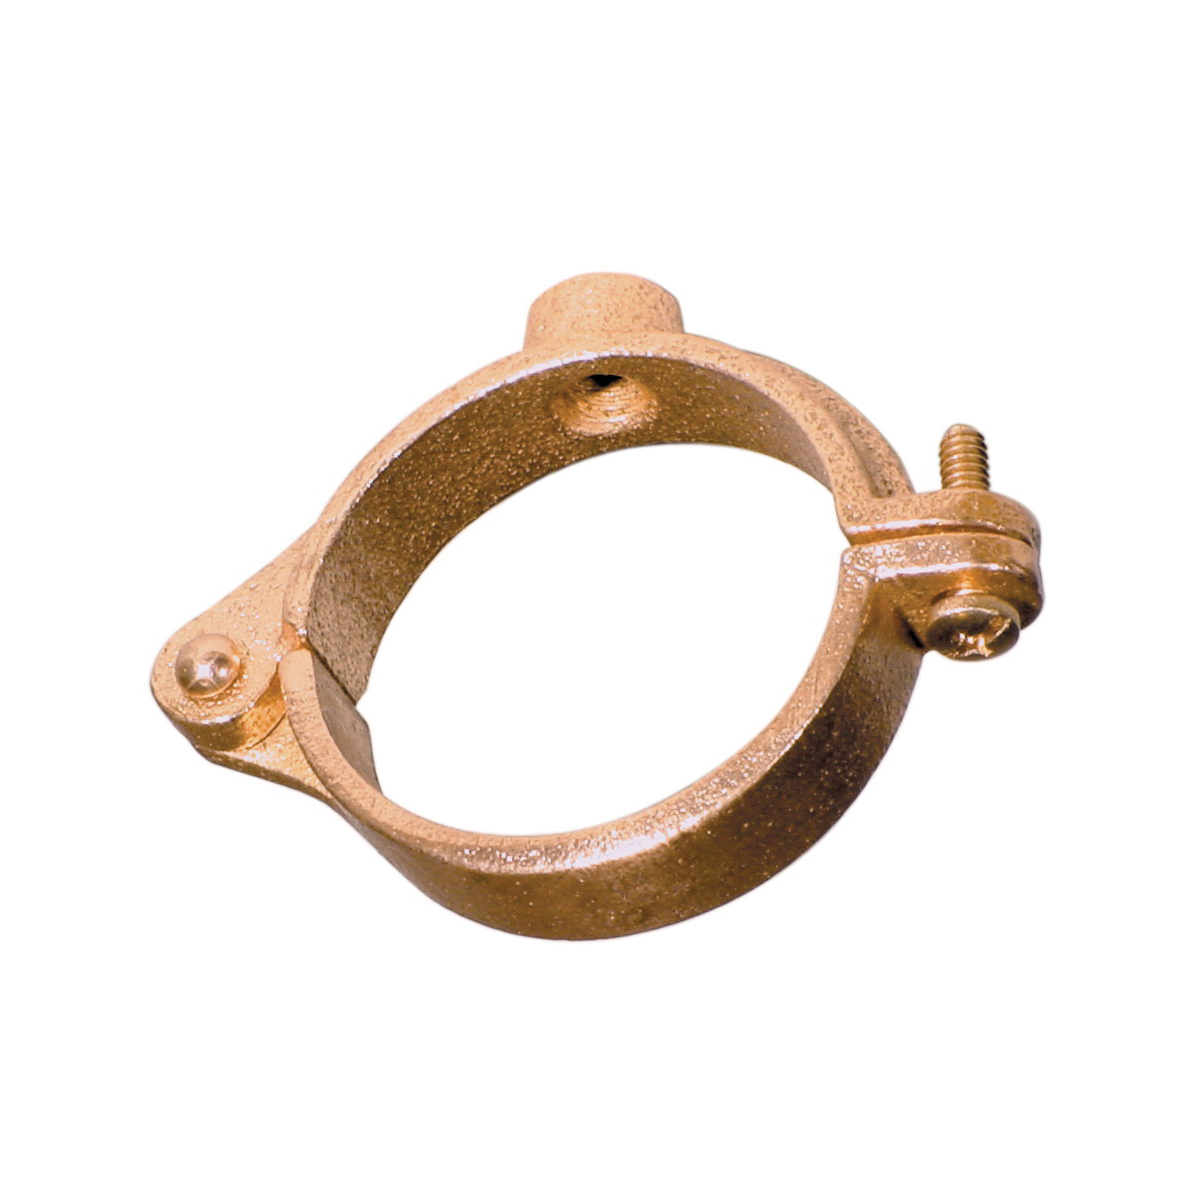 SPF/Anvil™ 0560018913 FIG CT-138R Extension Split Tube Clamp, 3/4 in Pipe/Tube, 180 lb Load, Malleable Iron, Copper Plated, Import